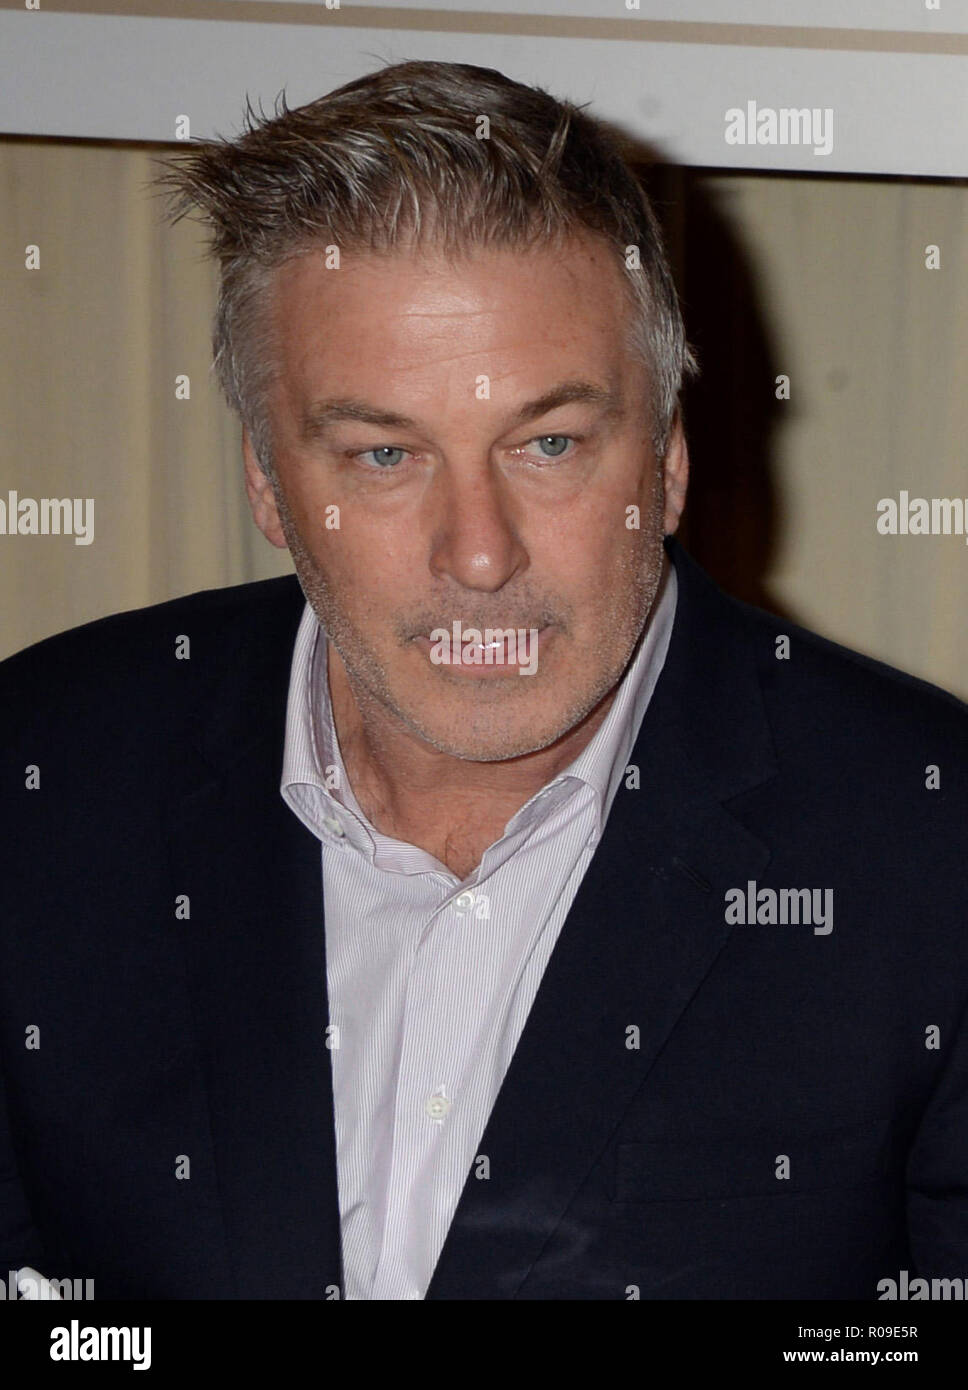 NEW YORK, NY - NOVEMBER 08: Alec Baldwin, actor and comedian, signing copies of You Cant Spell America Without Me on November 8, 2017 in New York City.   People:  Alec Baldwin Stock Photo